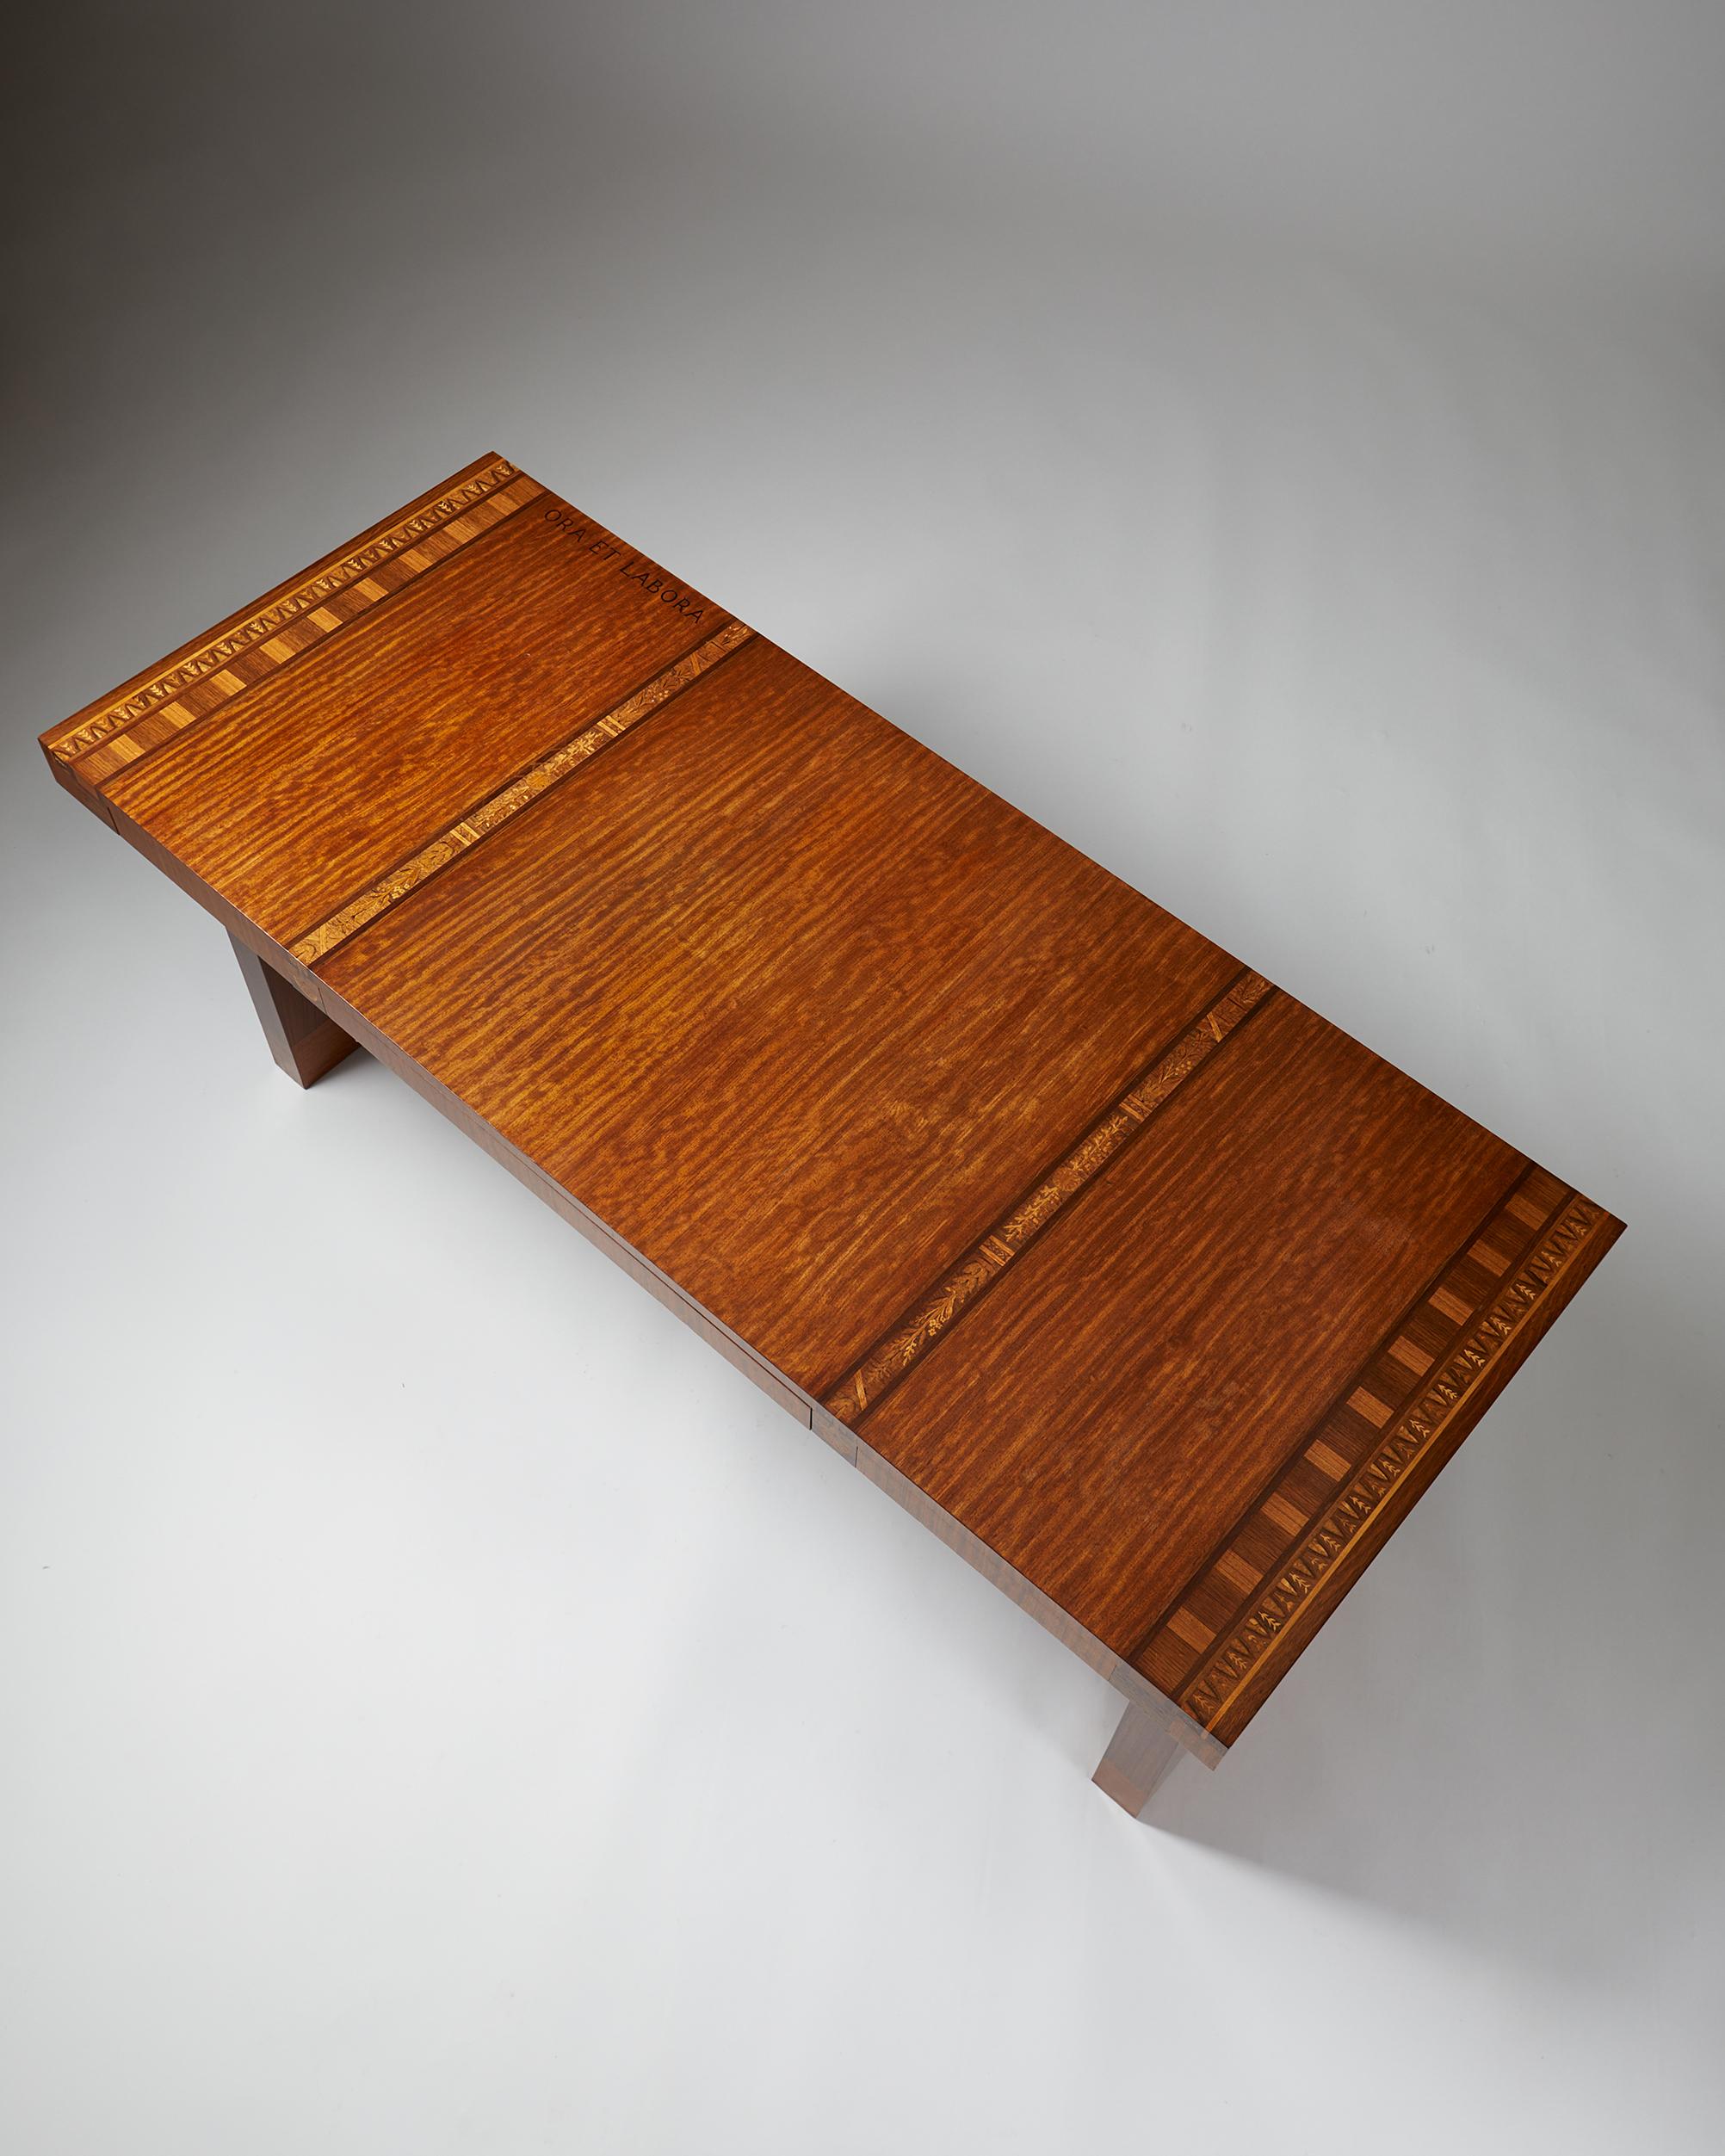 Desk made of Mahogany and Walnut Designed by Carl Malmsten, Sweden, 1934 1